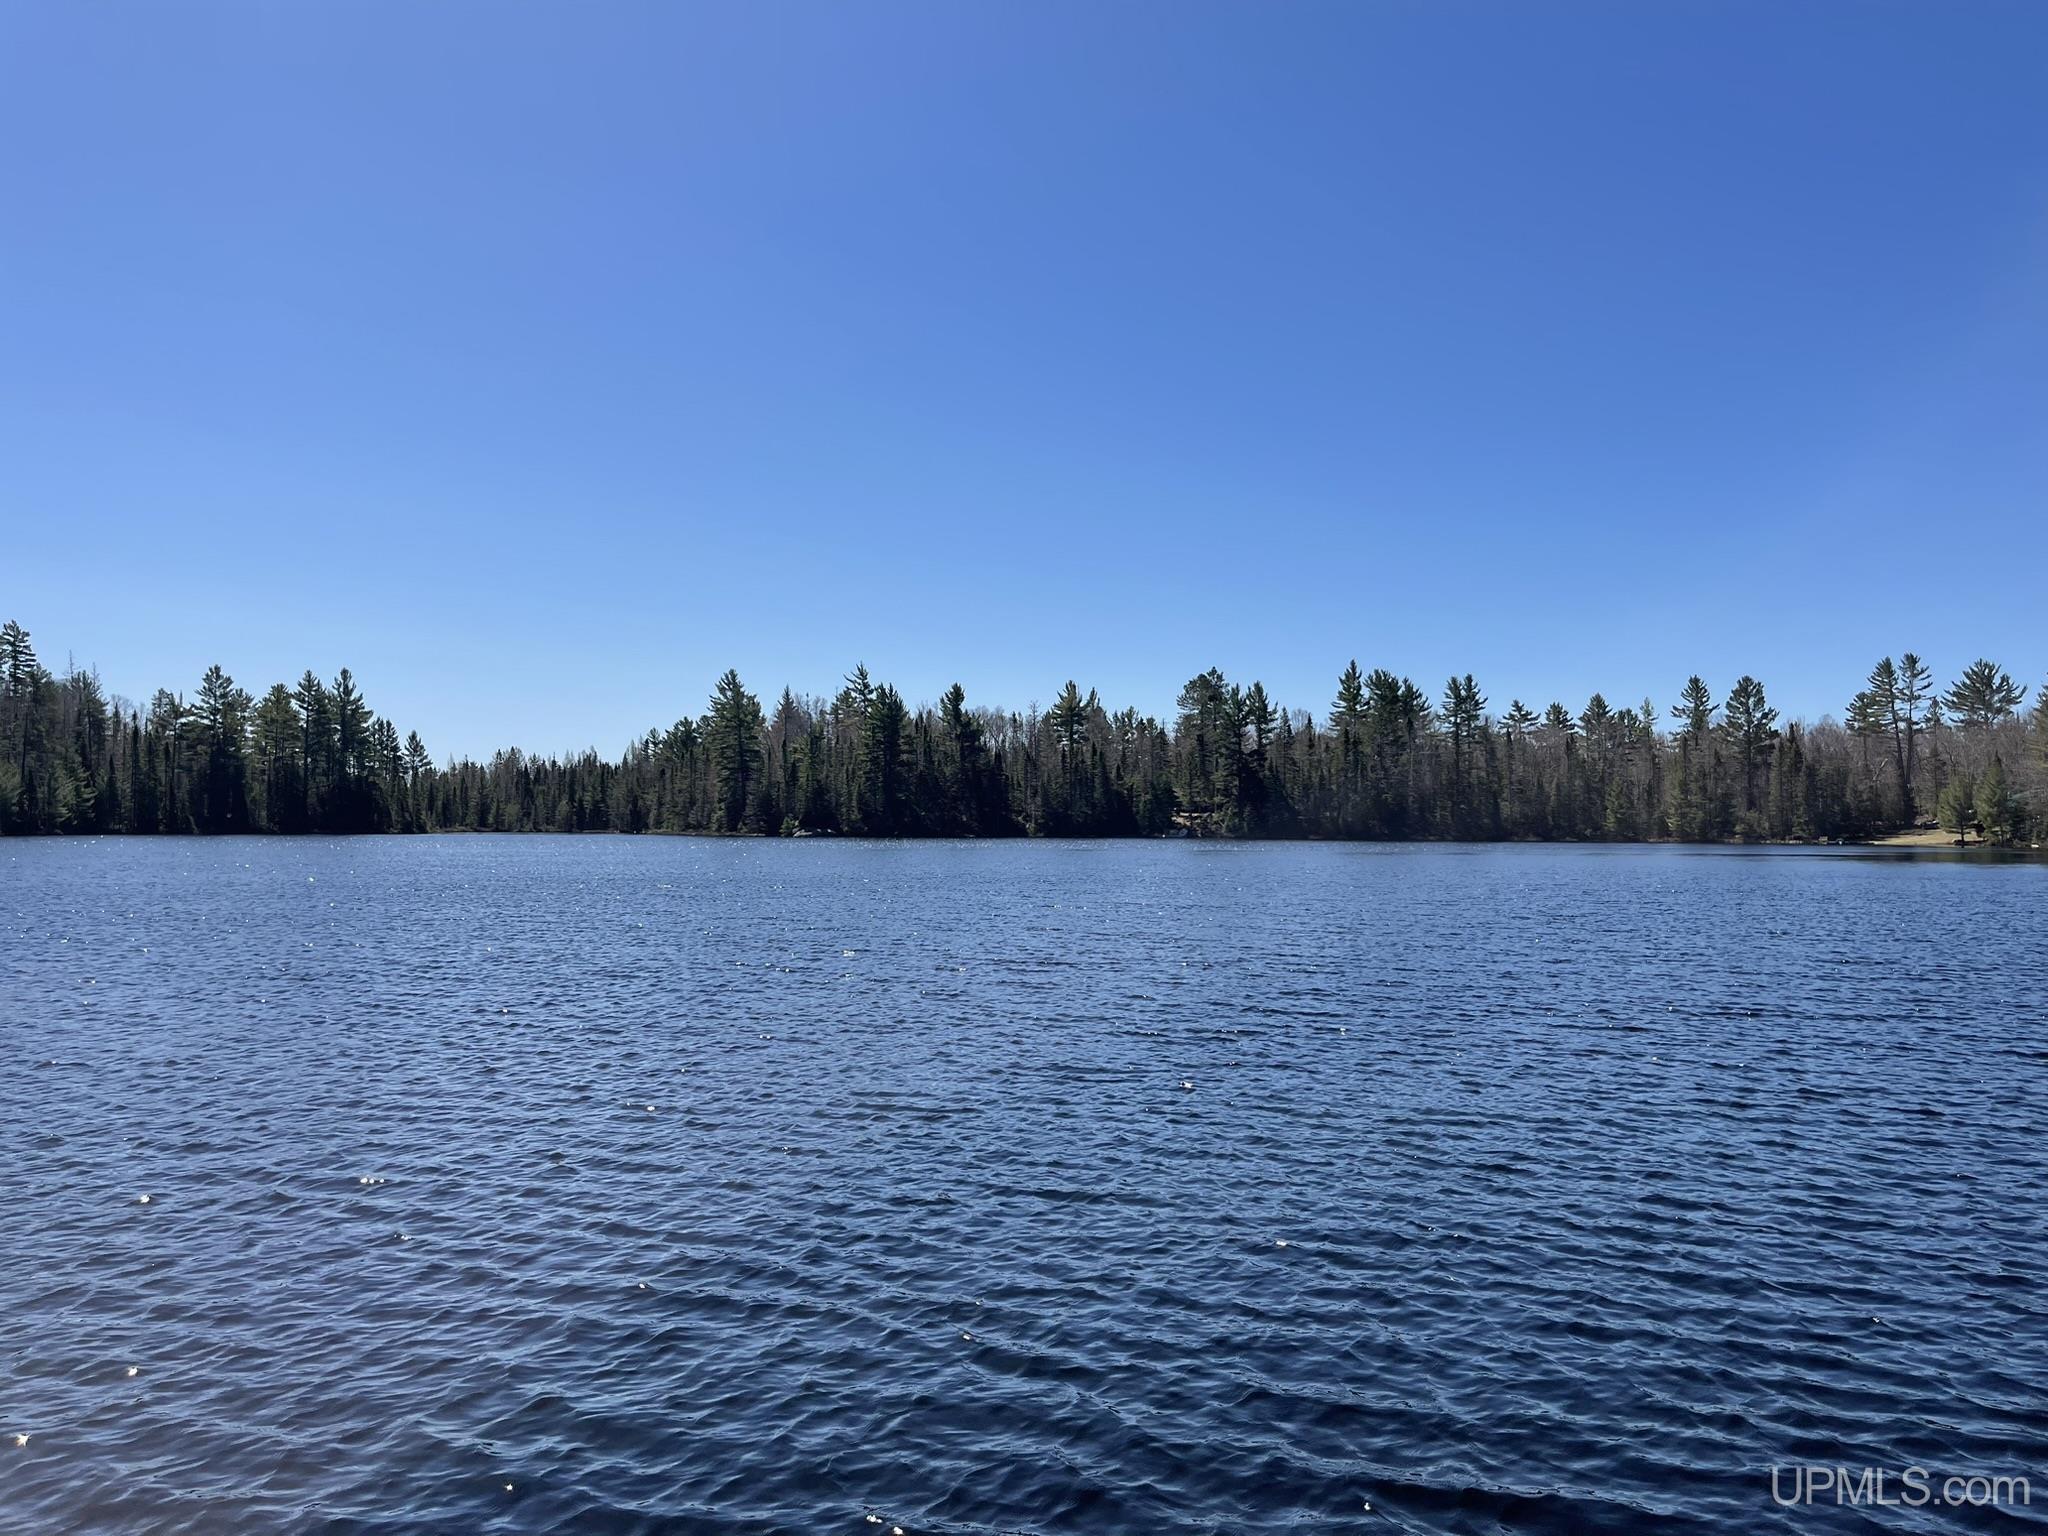 Listing #50140861 Michigamme